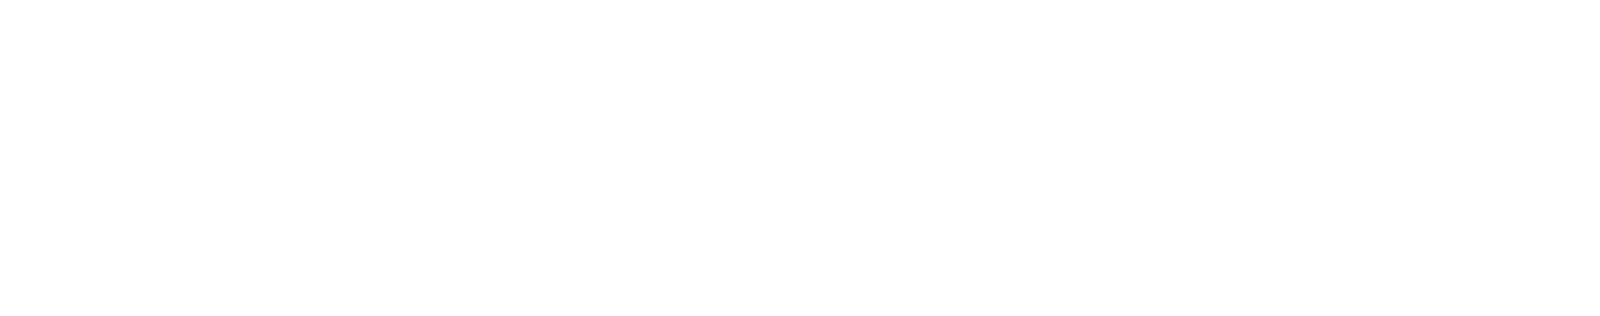 New Covenant House